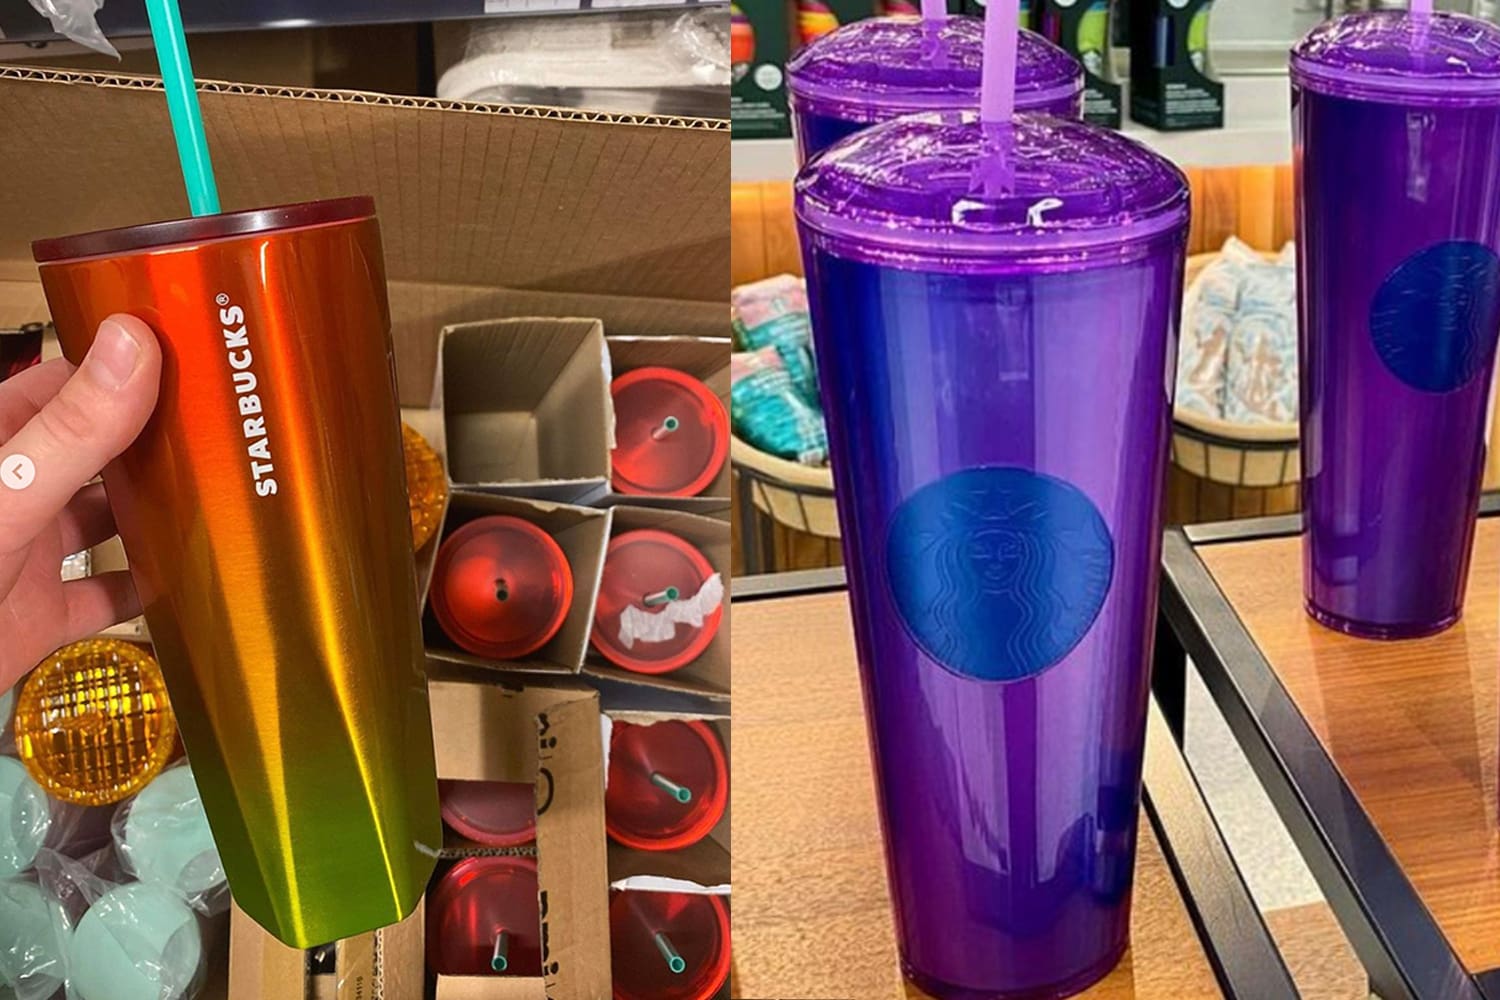 Starbucks Cups and Tumblers for Summer 2022 Are Here - Let's Eat Cake